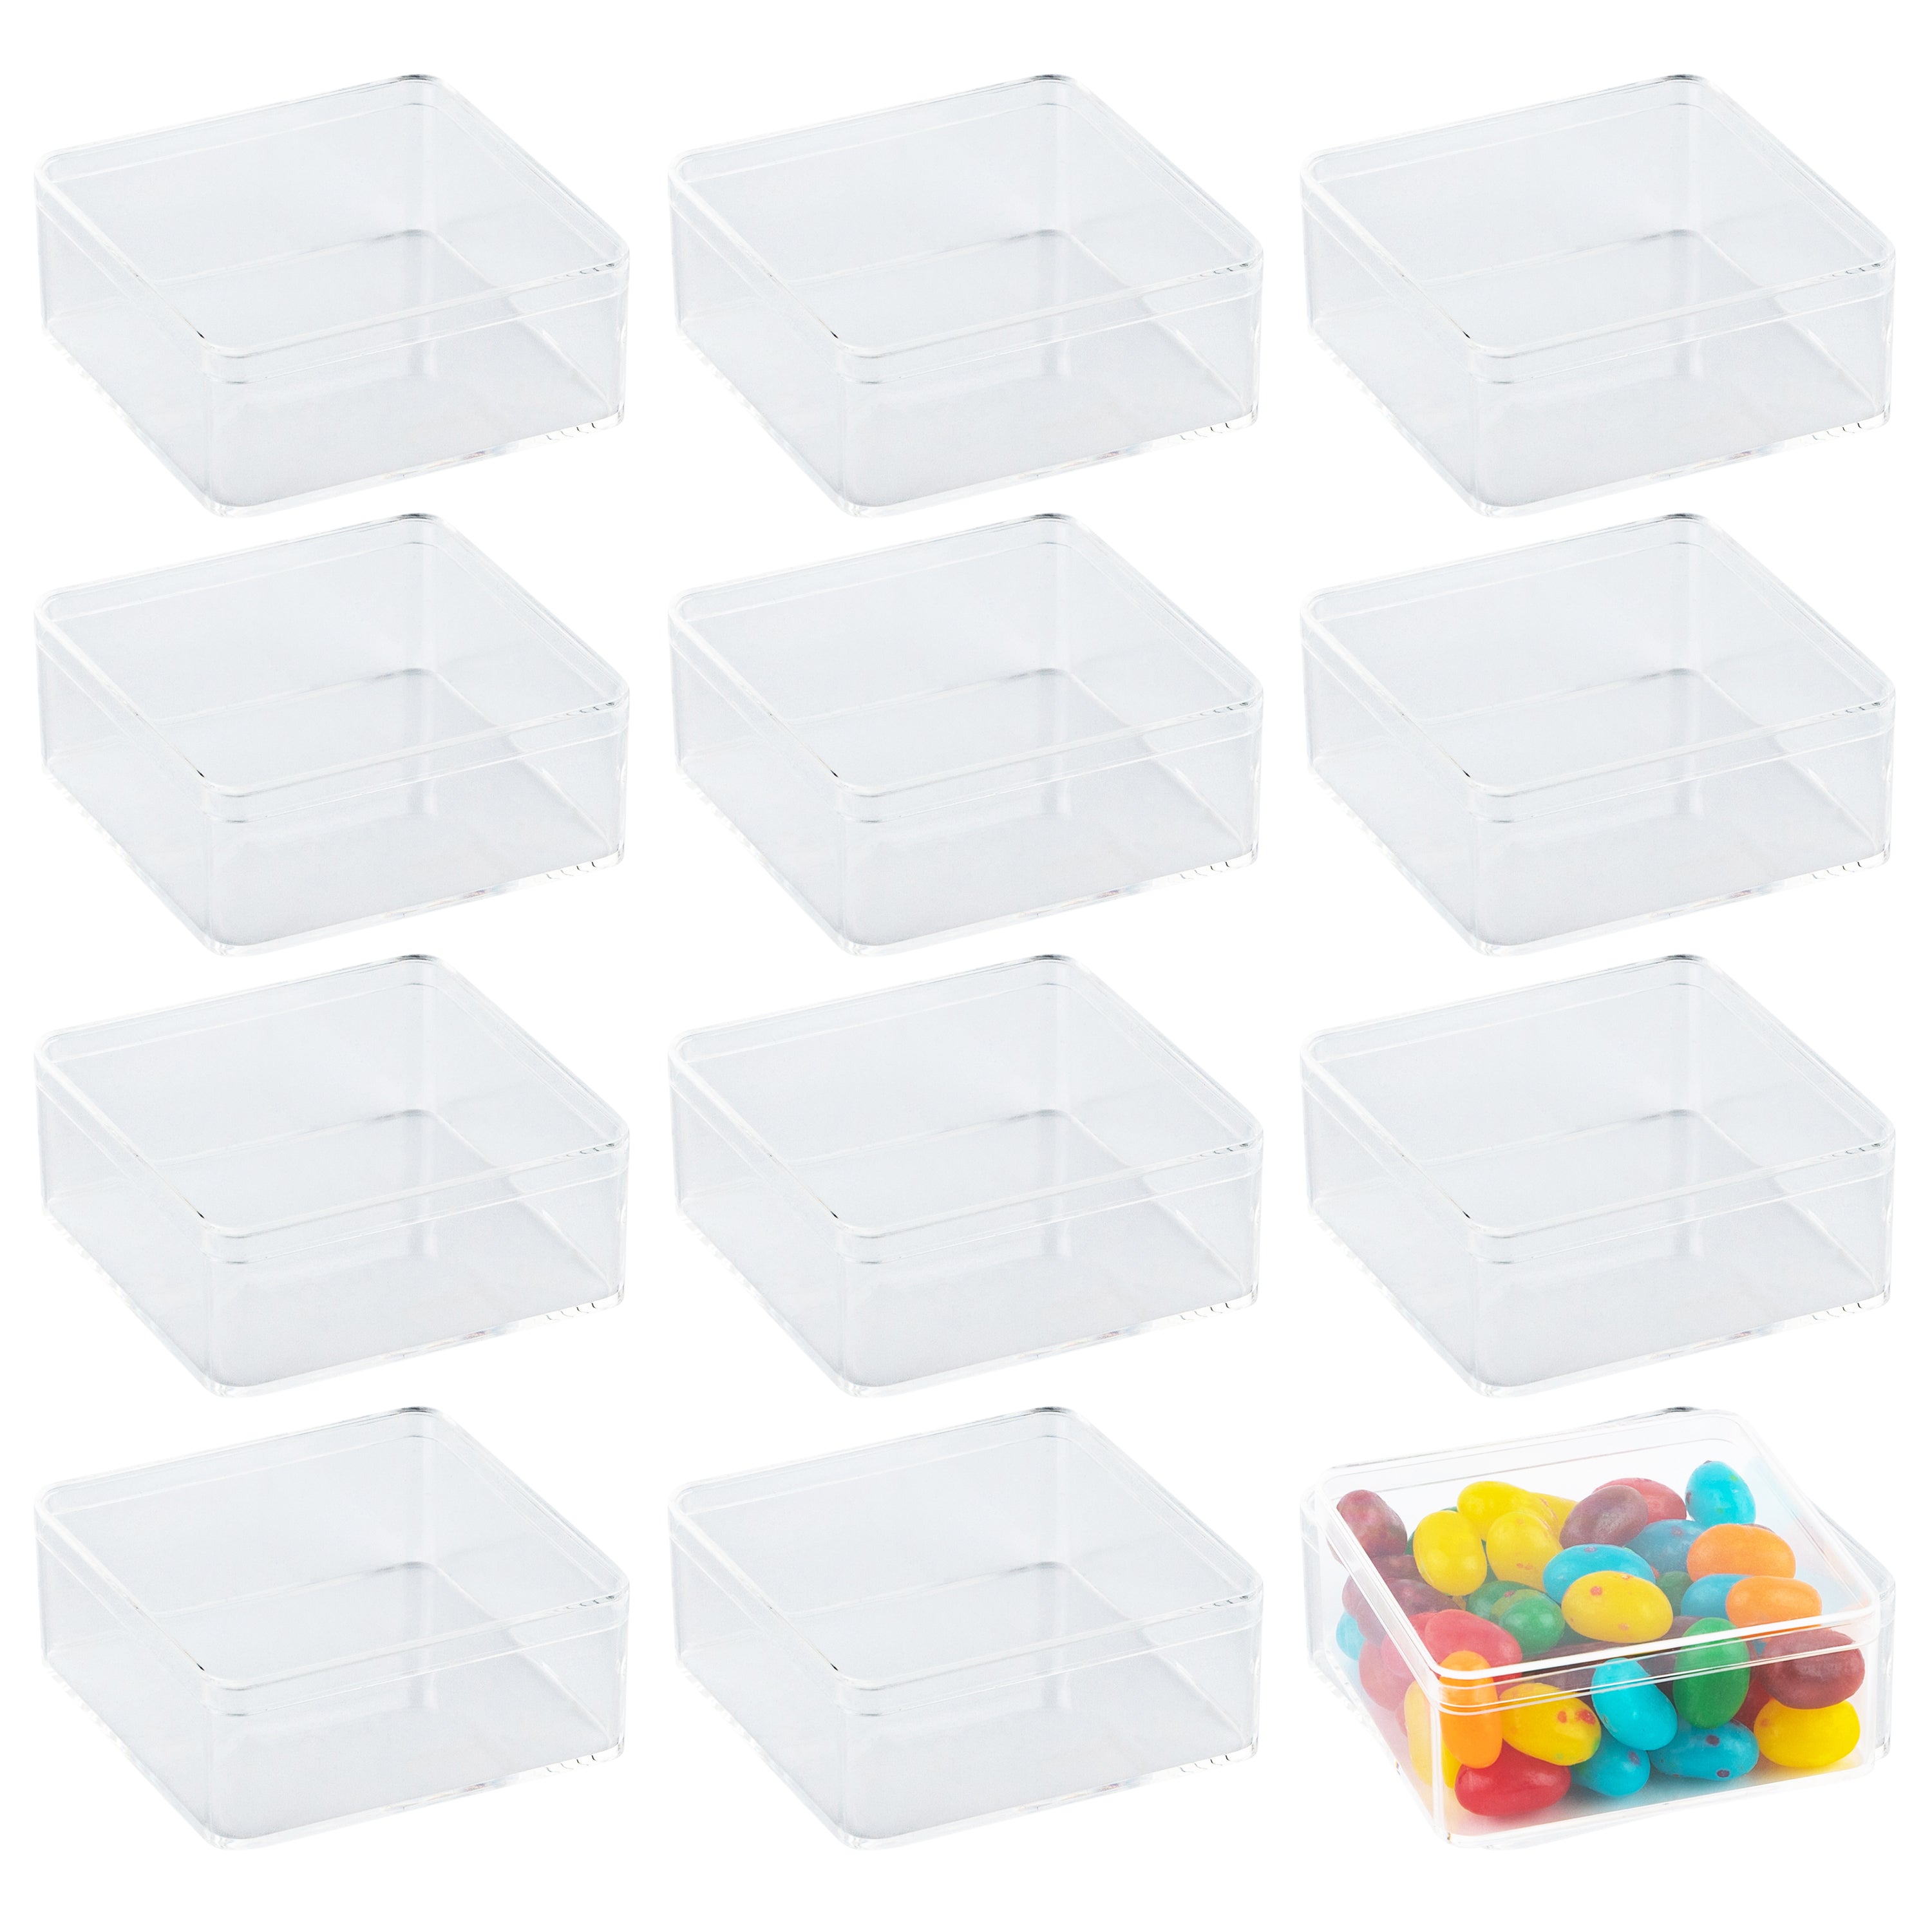 Clear Acrylic Boxes with Lid 3.375x3.375x1.37 Inches Pack of 12 Storage Box, Gift Box and Treat Box. Lucite Cube Display Boxes